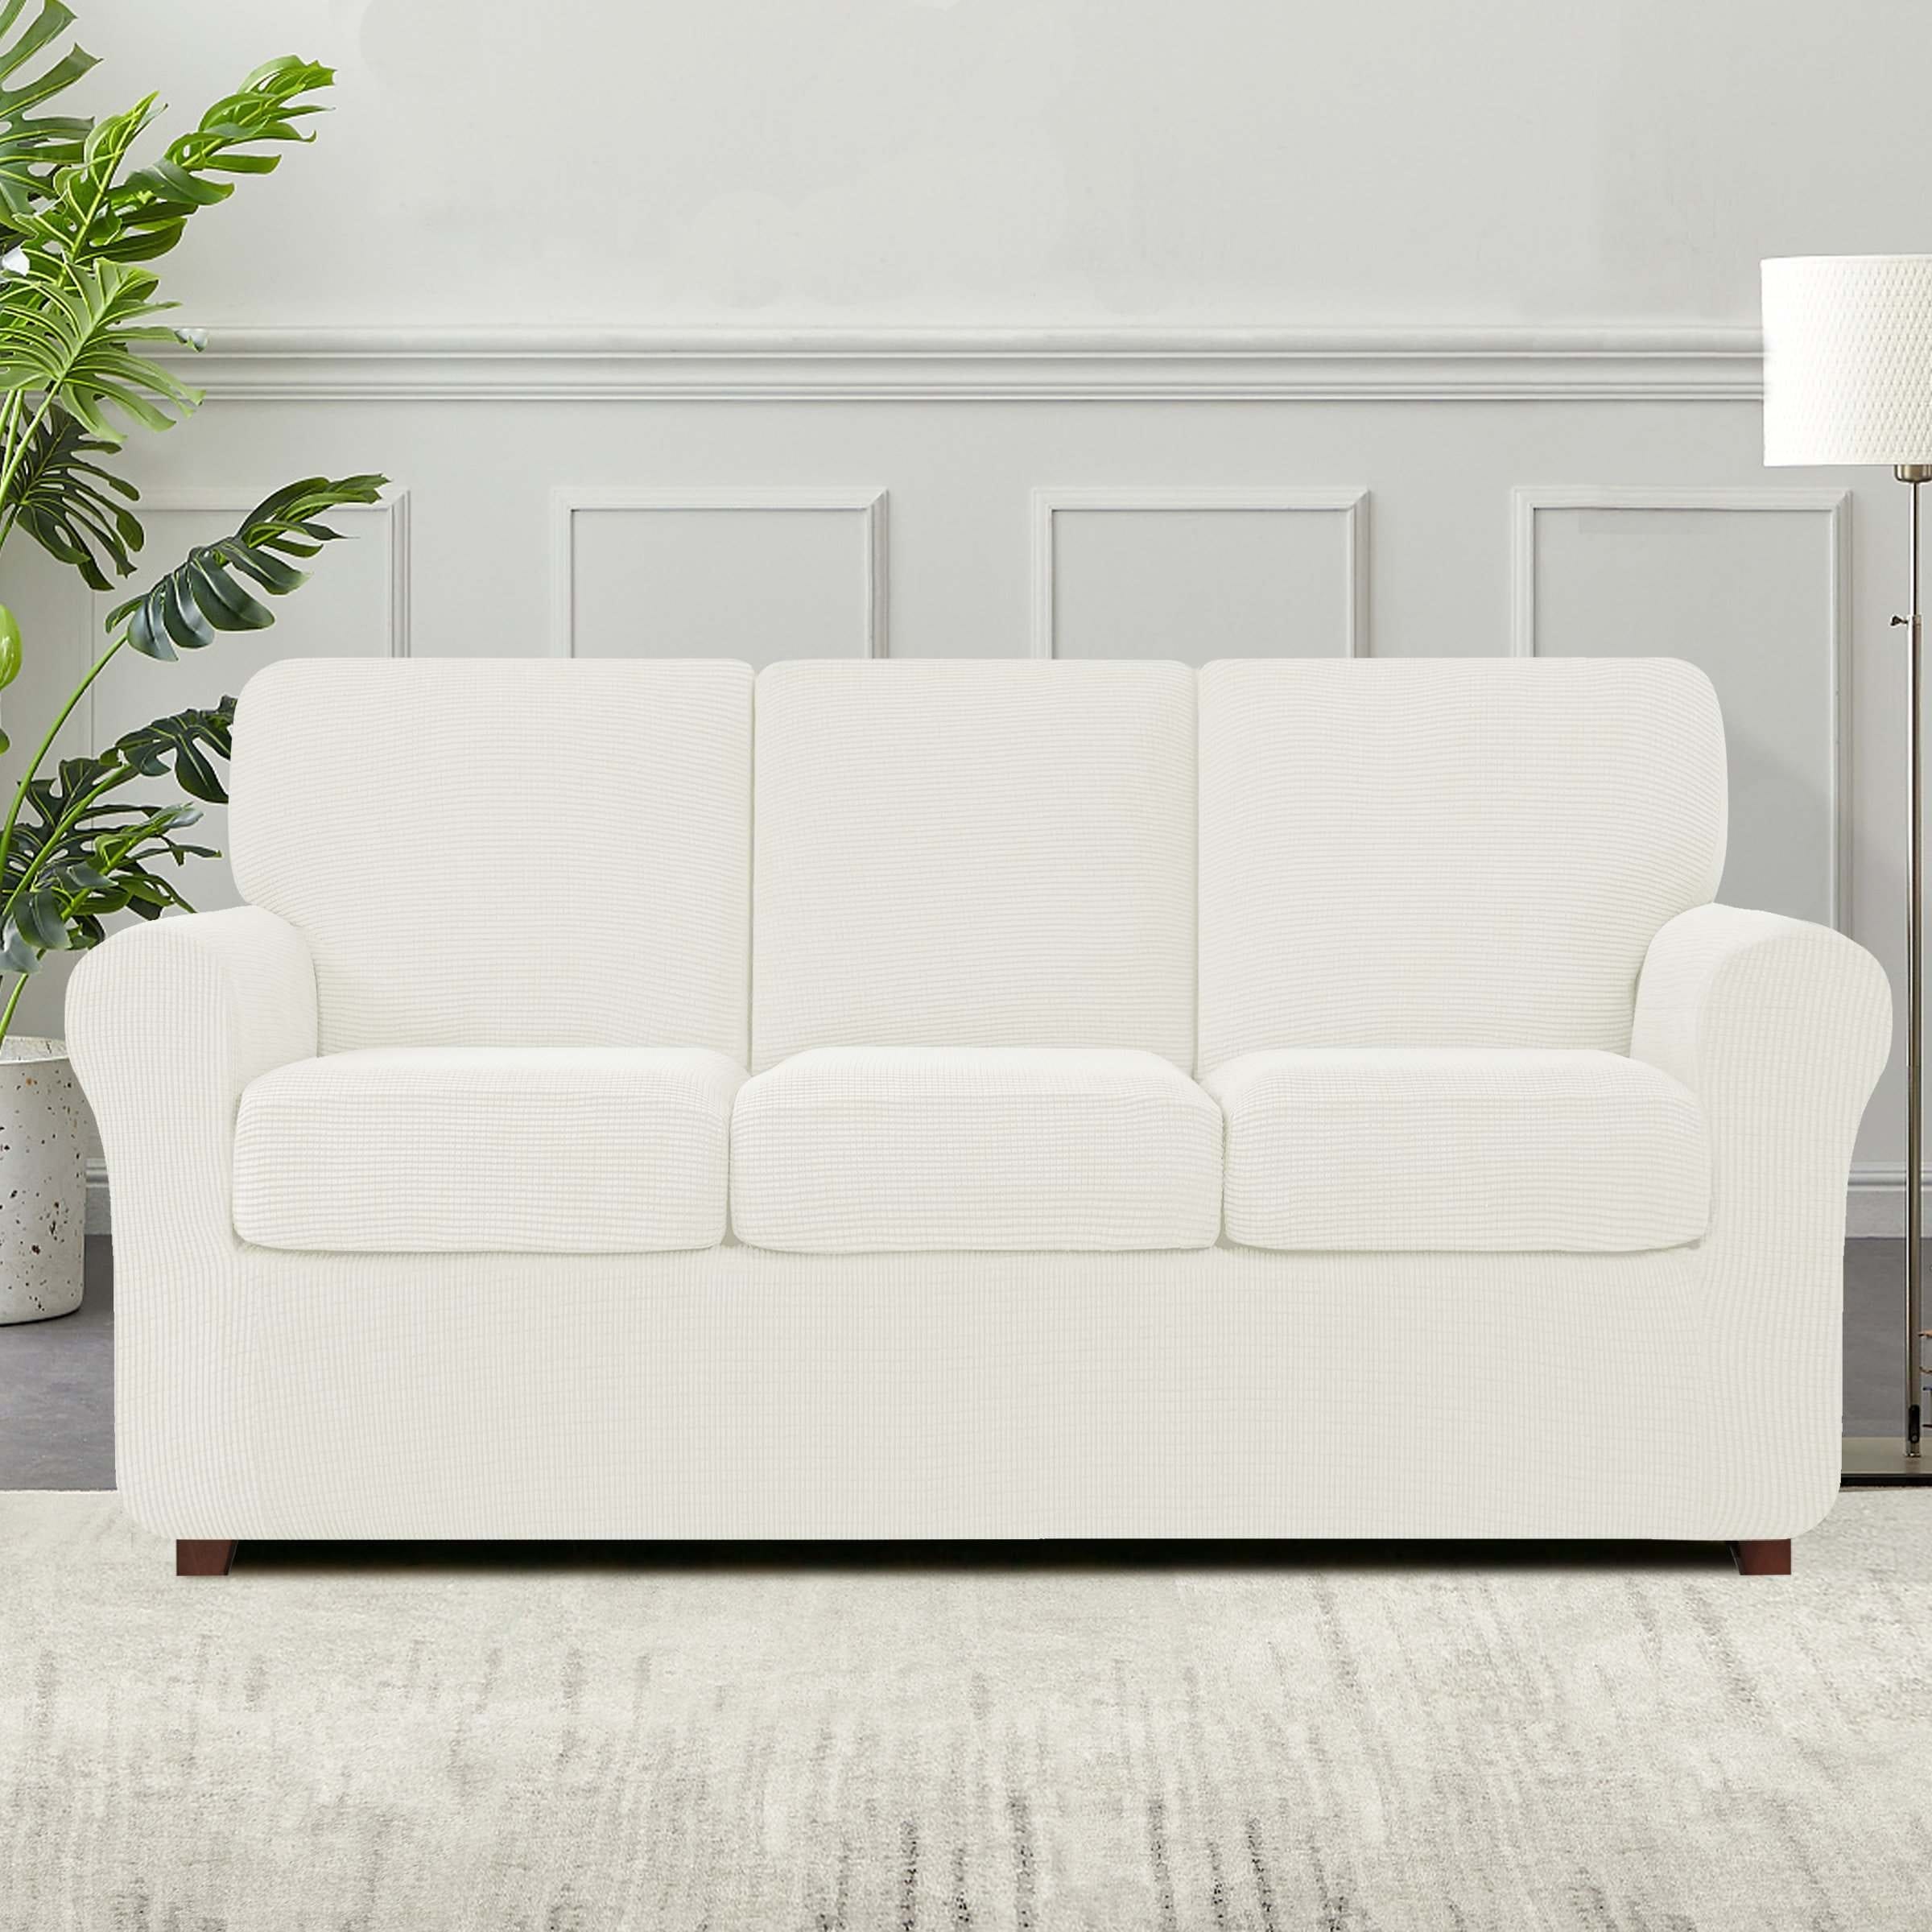 https://ak1.ostkcdn.com/images/products/is/images/direct/e31854052bca3175c4d409fb5b83d9732e321e41/Subrtex-9-Piece-Stretch-Sofa-Slipcover-Sets-with-4-Backrest-Cushion-Covers-and-4-Seat-Cushion-Covers.jpg